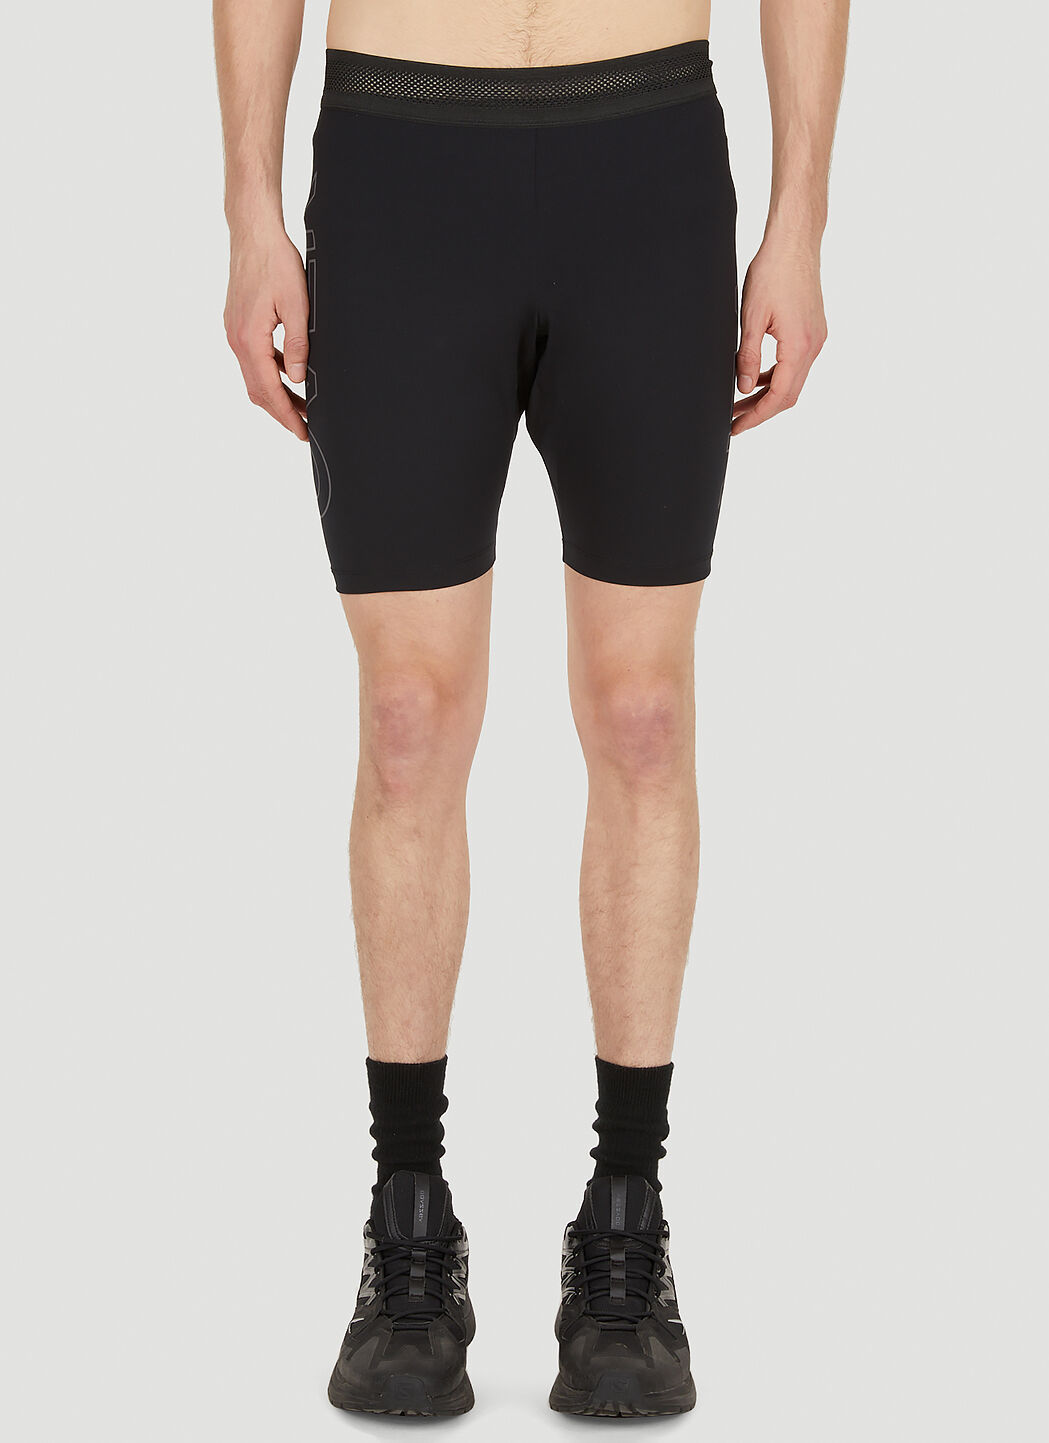 OVER OVER Cycling Shorts Black ovr0150005